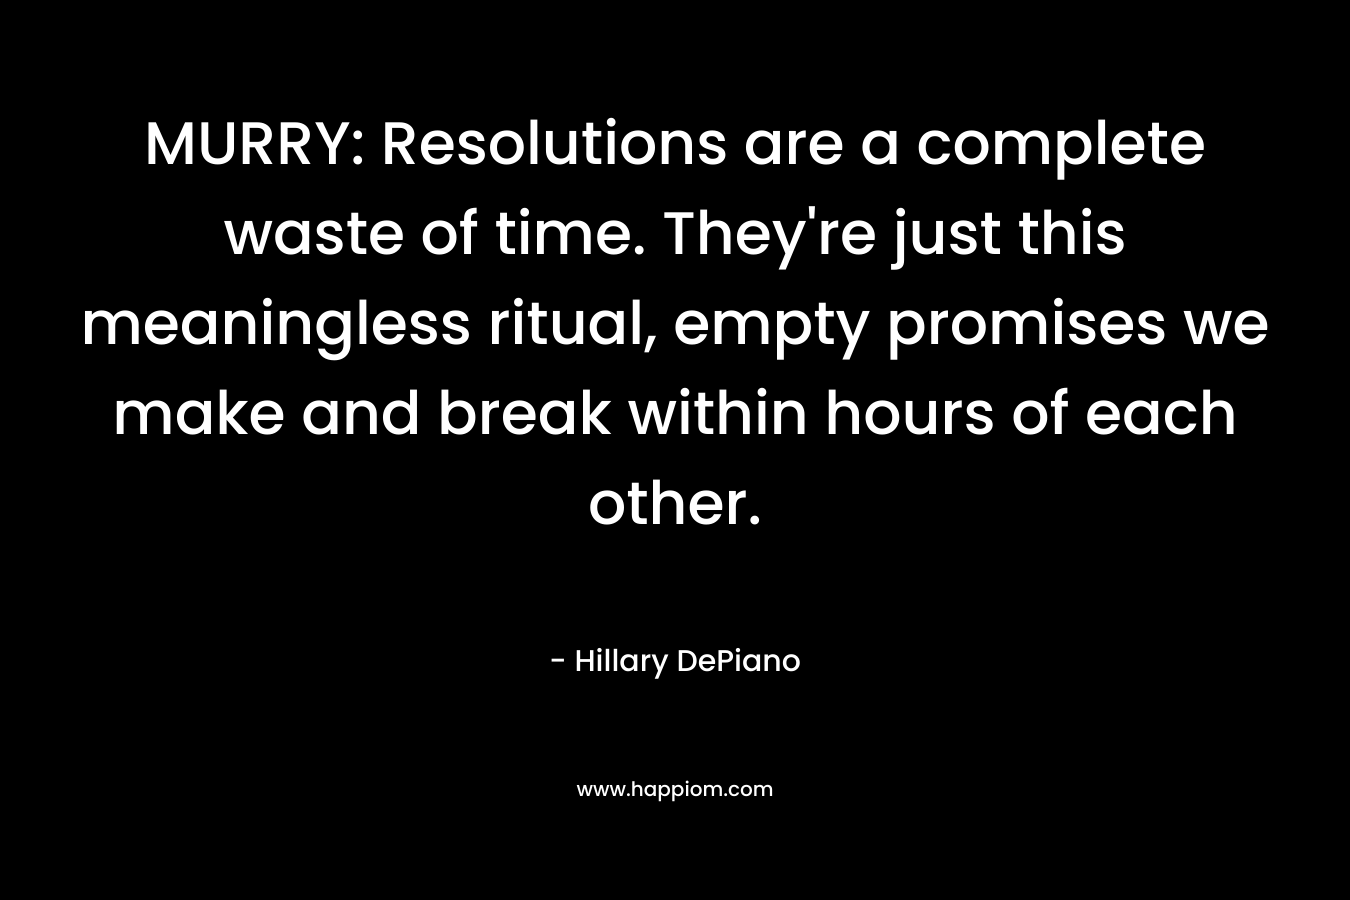 MURRY: Resolutions are a complete waste of time. They’re just this meaningless ritual, empty promises we make and break within hours of each other. – Hillary DePiano